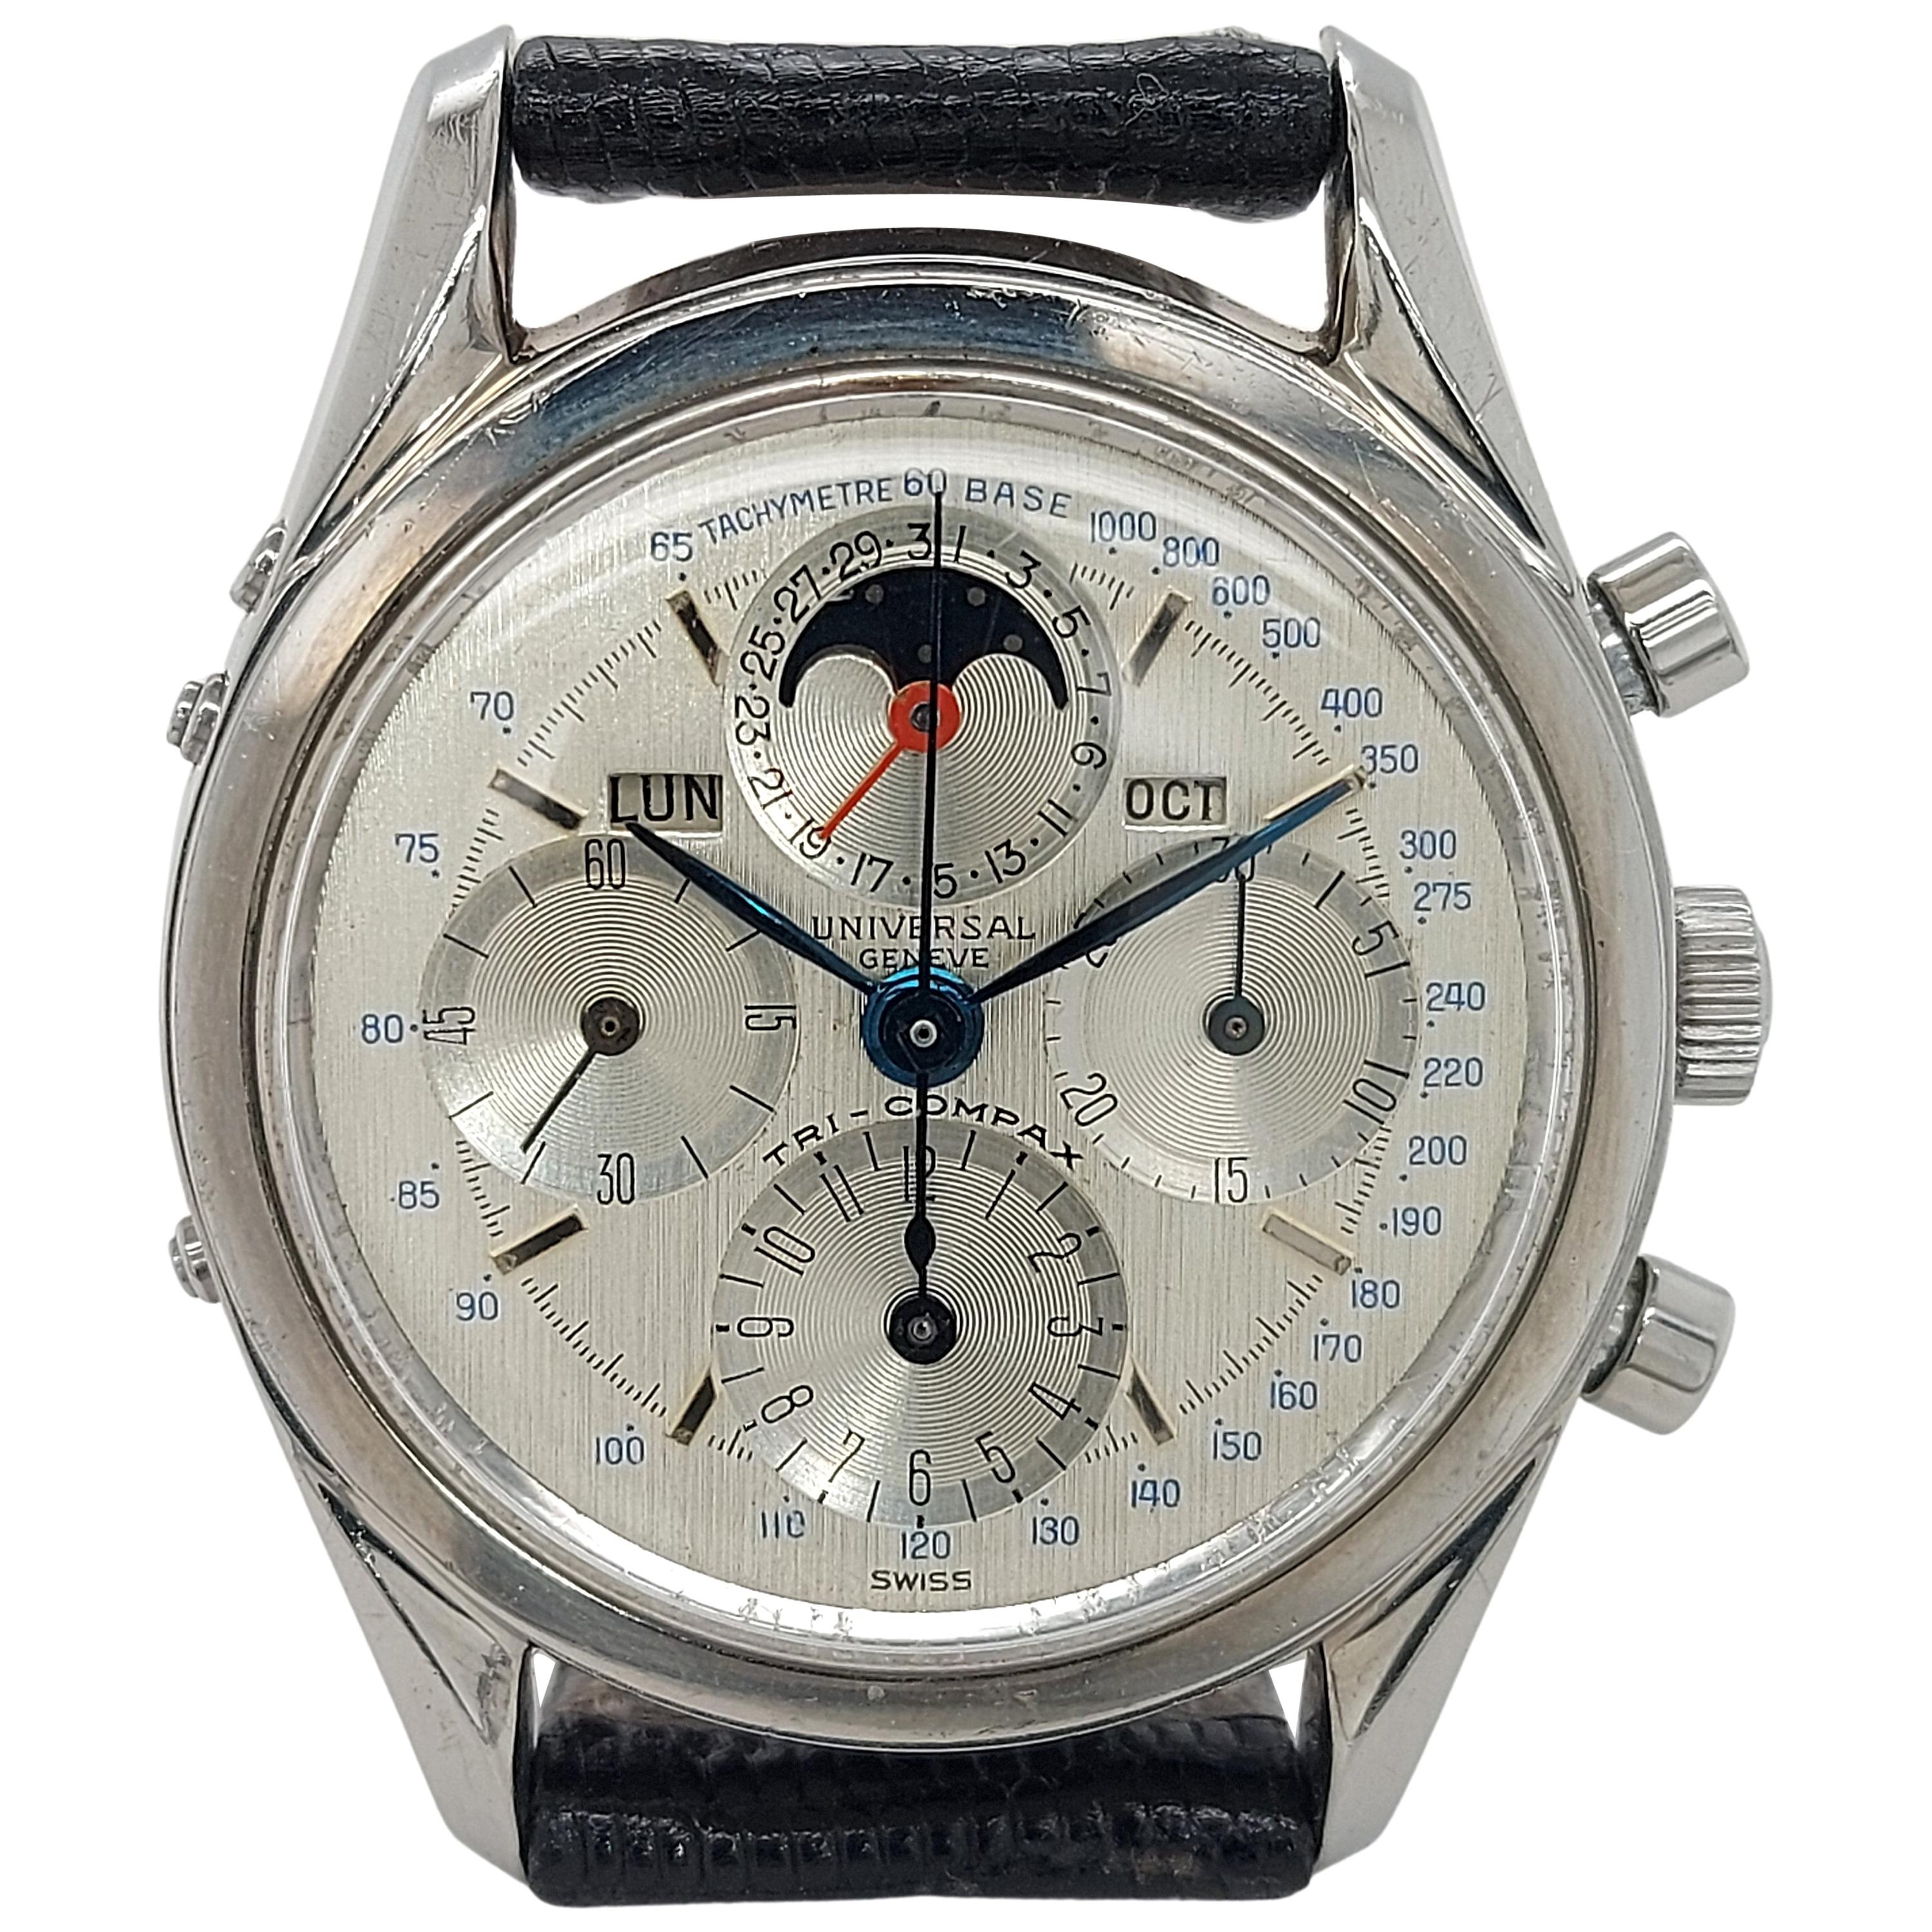 Universal Genève Tri Compax Chronograph Ref 222100, Rare Collector Watch